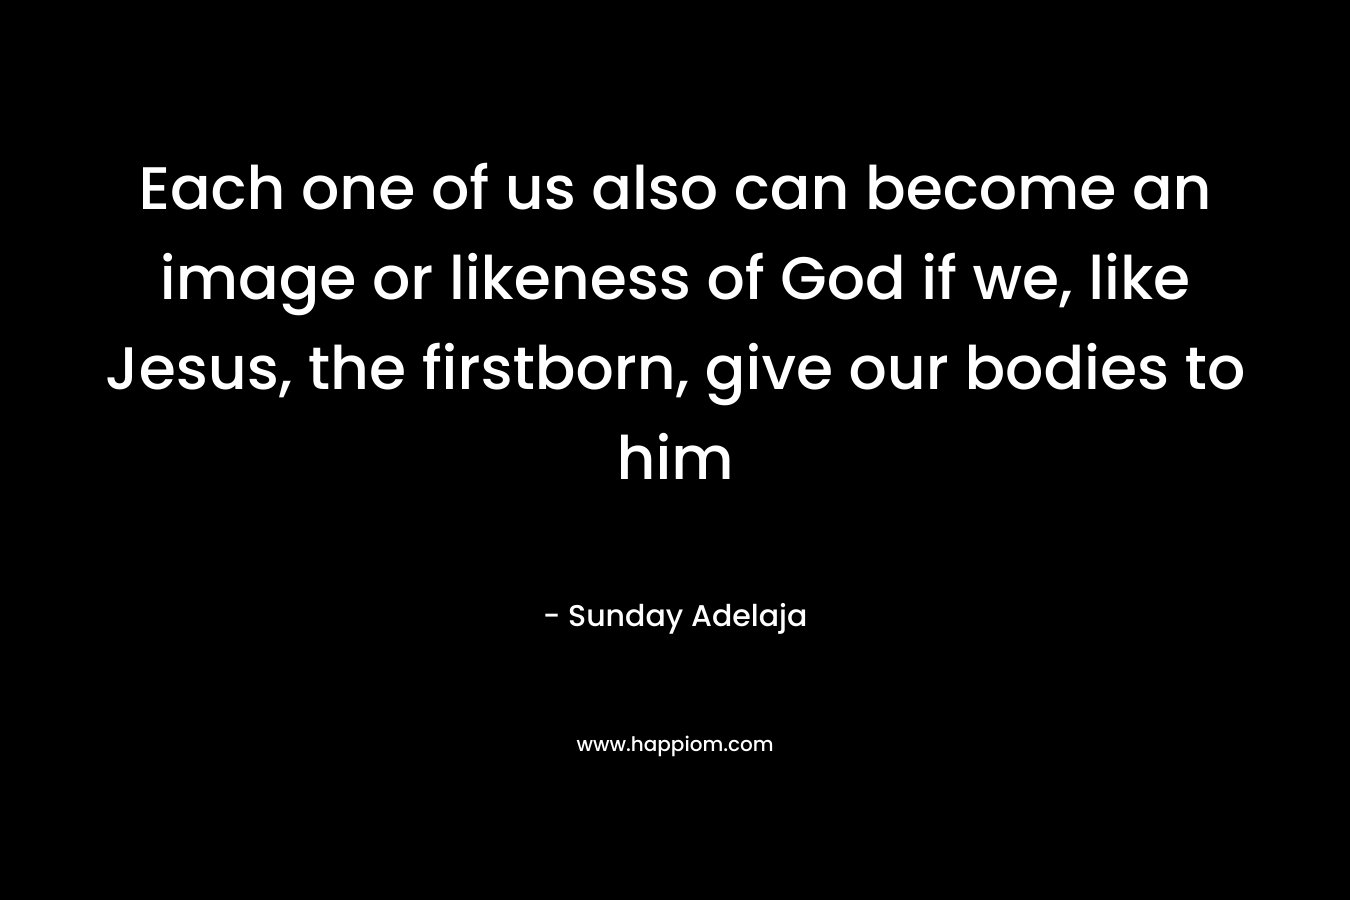 Each one of us also can become an image or likeness of God if we, like Jesus, the firstborn, give our bodies to him – Sunday Adelaja